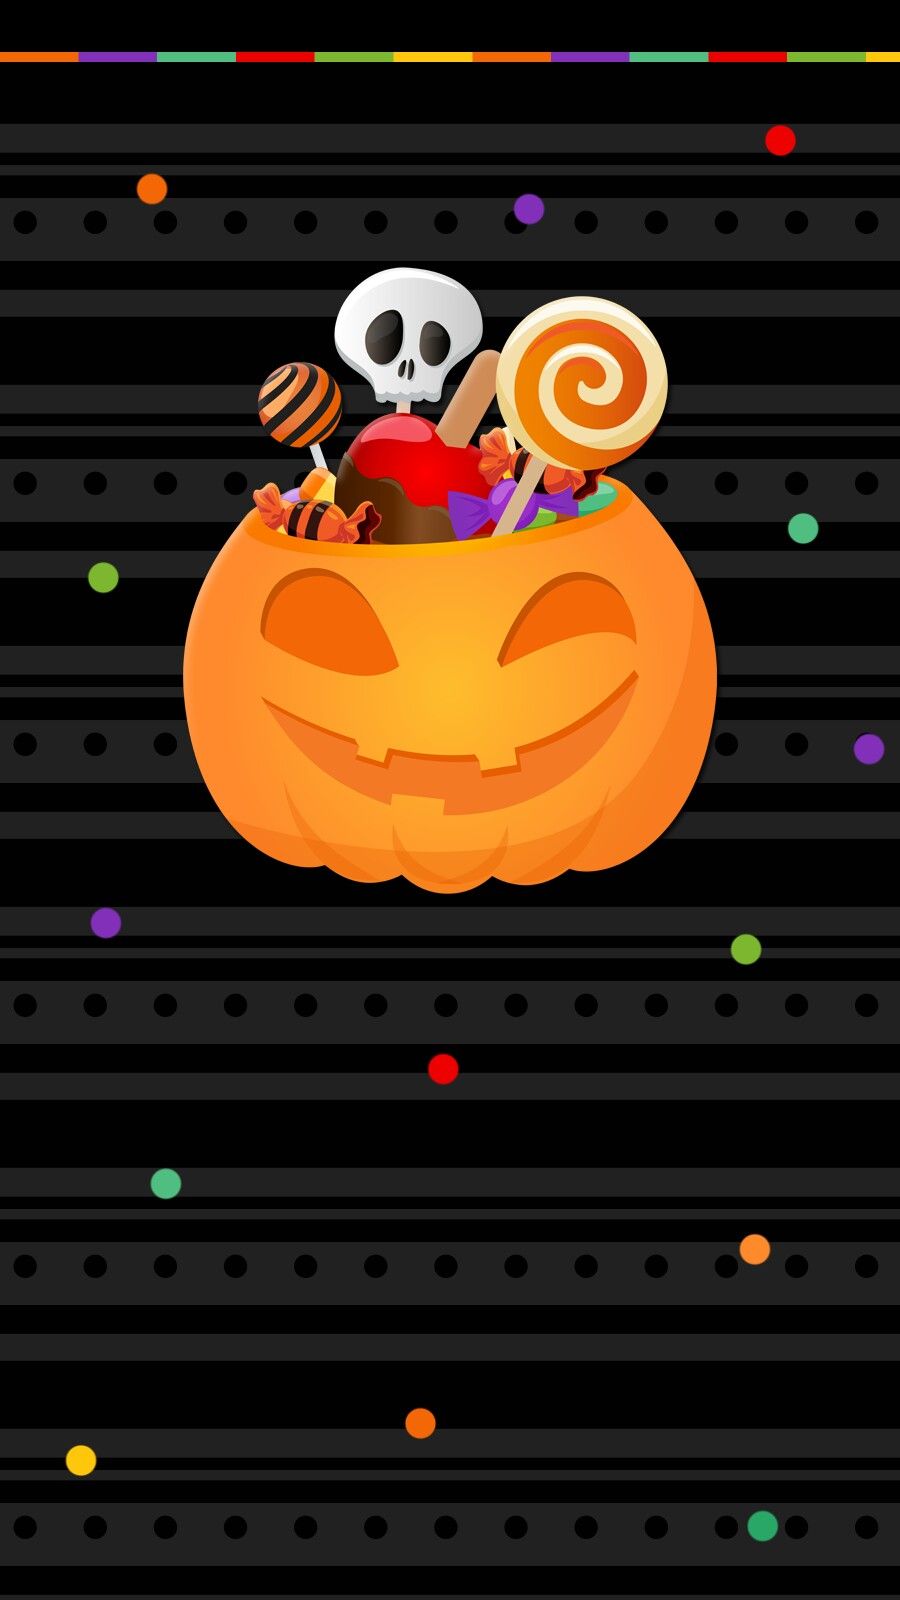 happy_halloween #wallpaper #iphone #android #theme #cute. Halloween wallpaper iphone, Halloween wallpaper cute, Halloween wallpaper